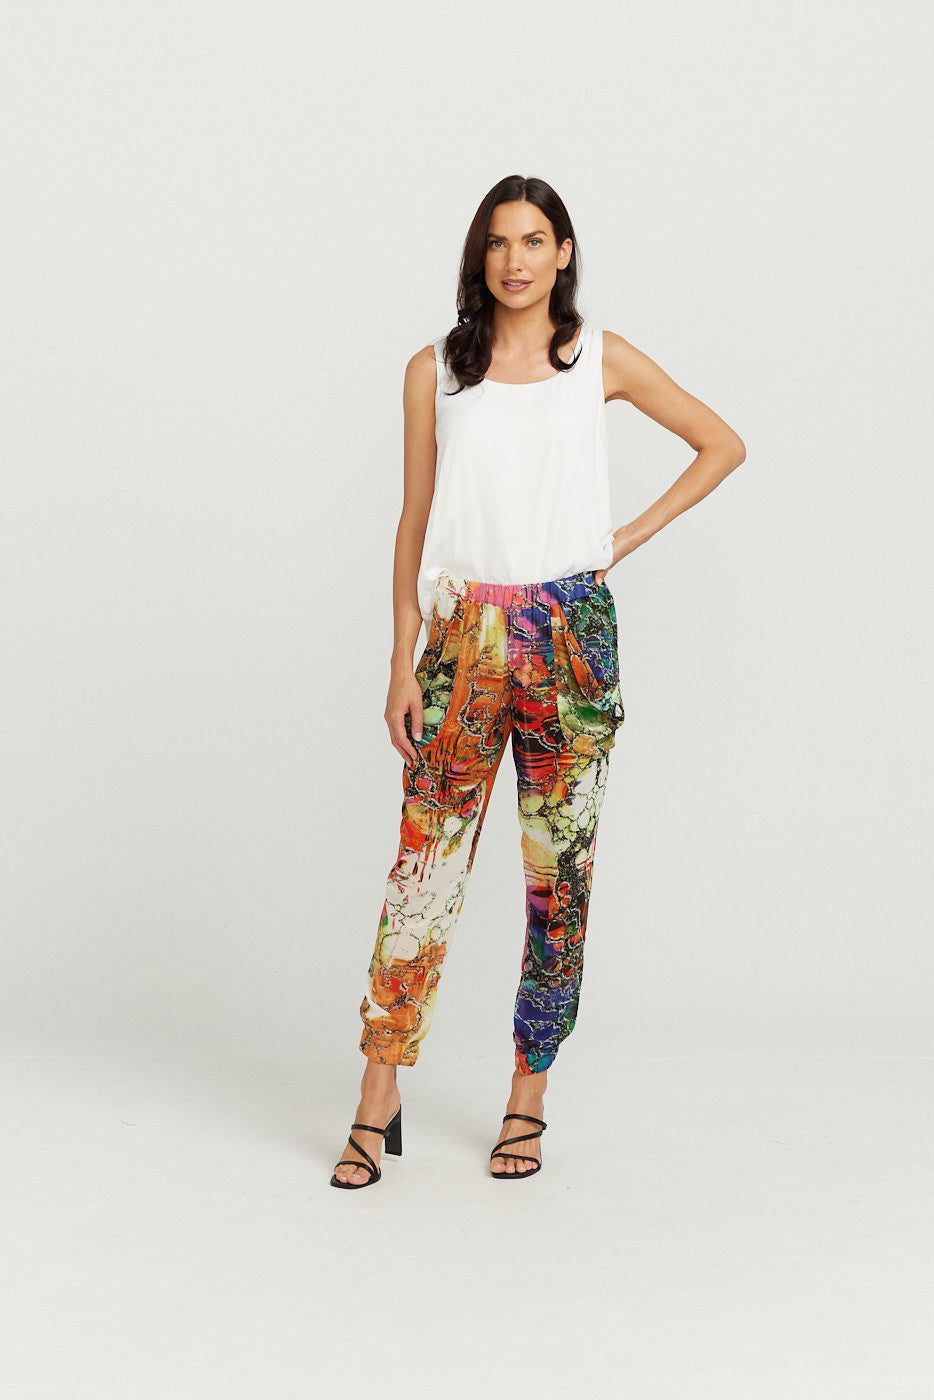 SLOUCHY PANTS / BRIGHT MARBLE PRINT